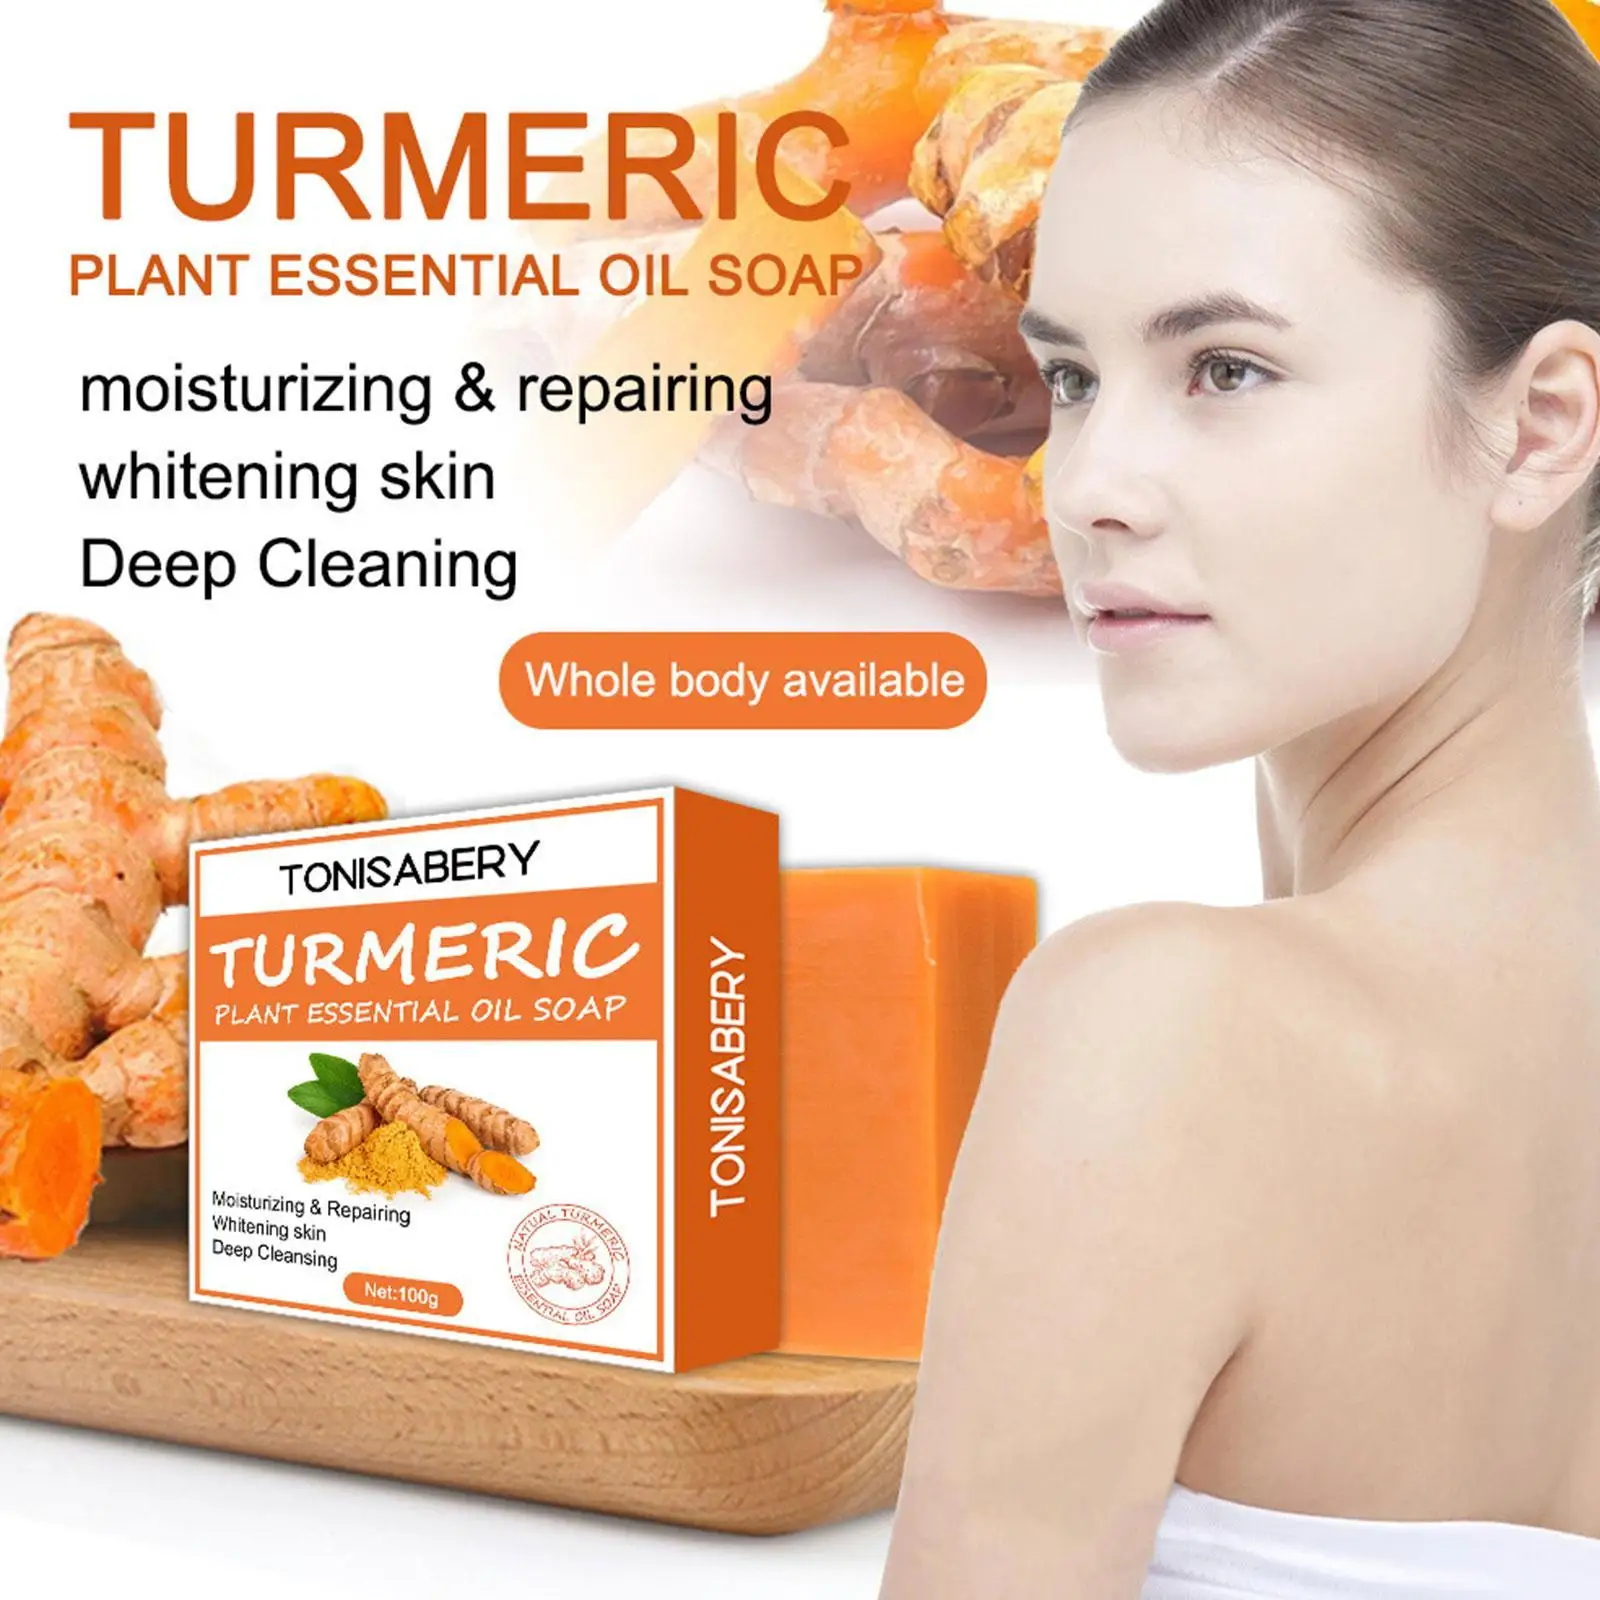 

Turmeric Cream Whitening Soap Natural Radiant Skin Smoothing Facial Reduction Acne Scars Dark Spots And Wrinkles Handmade Soap